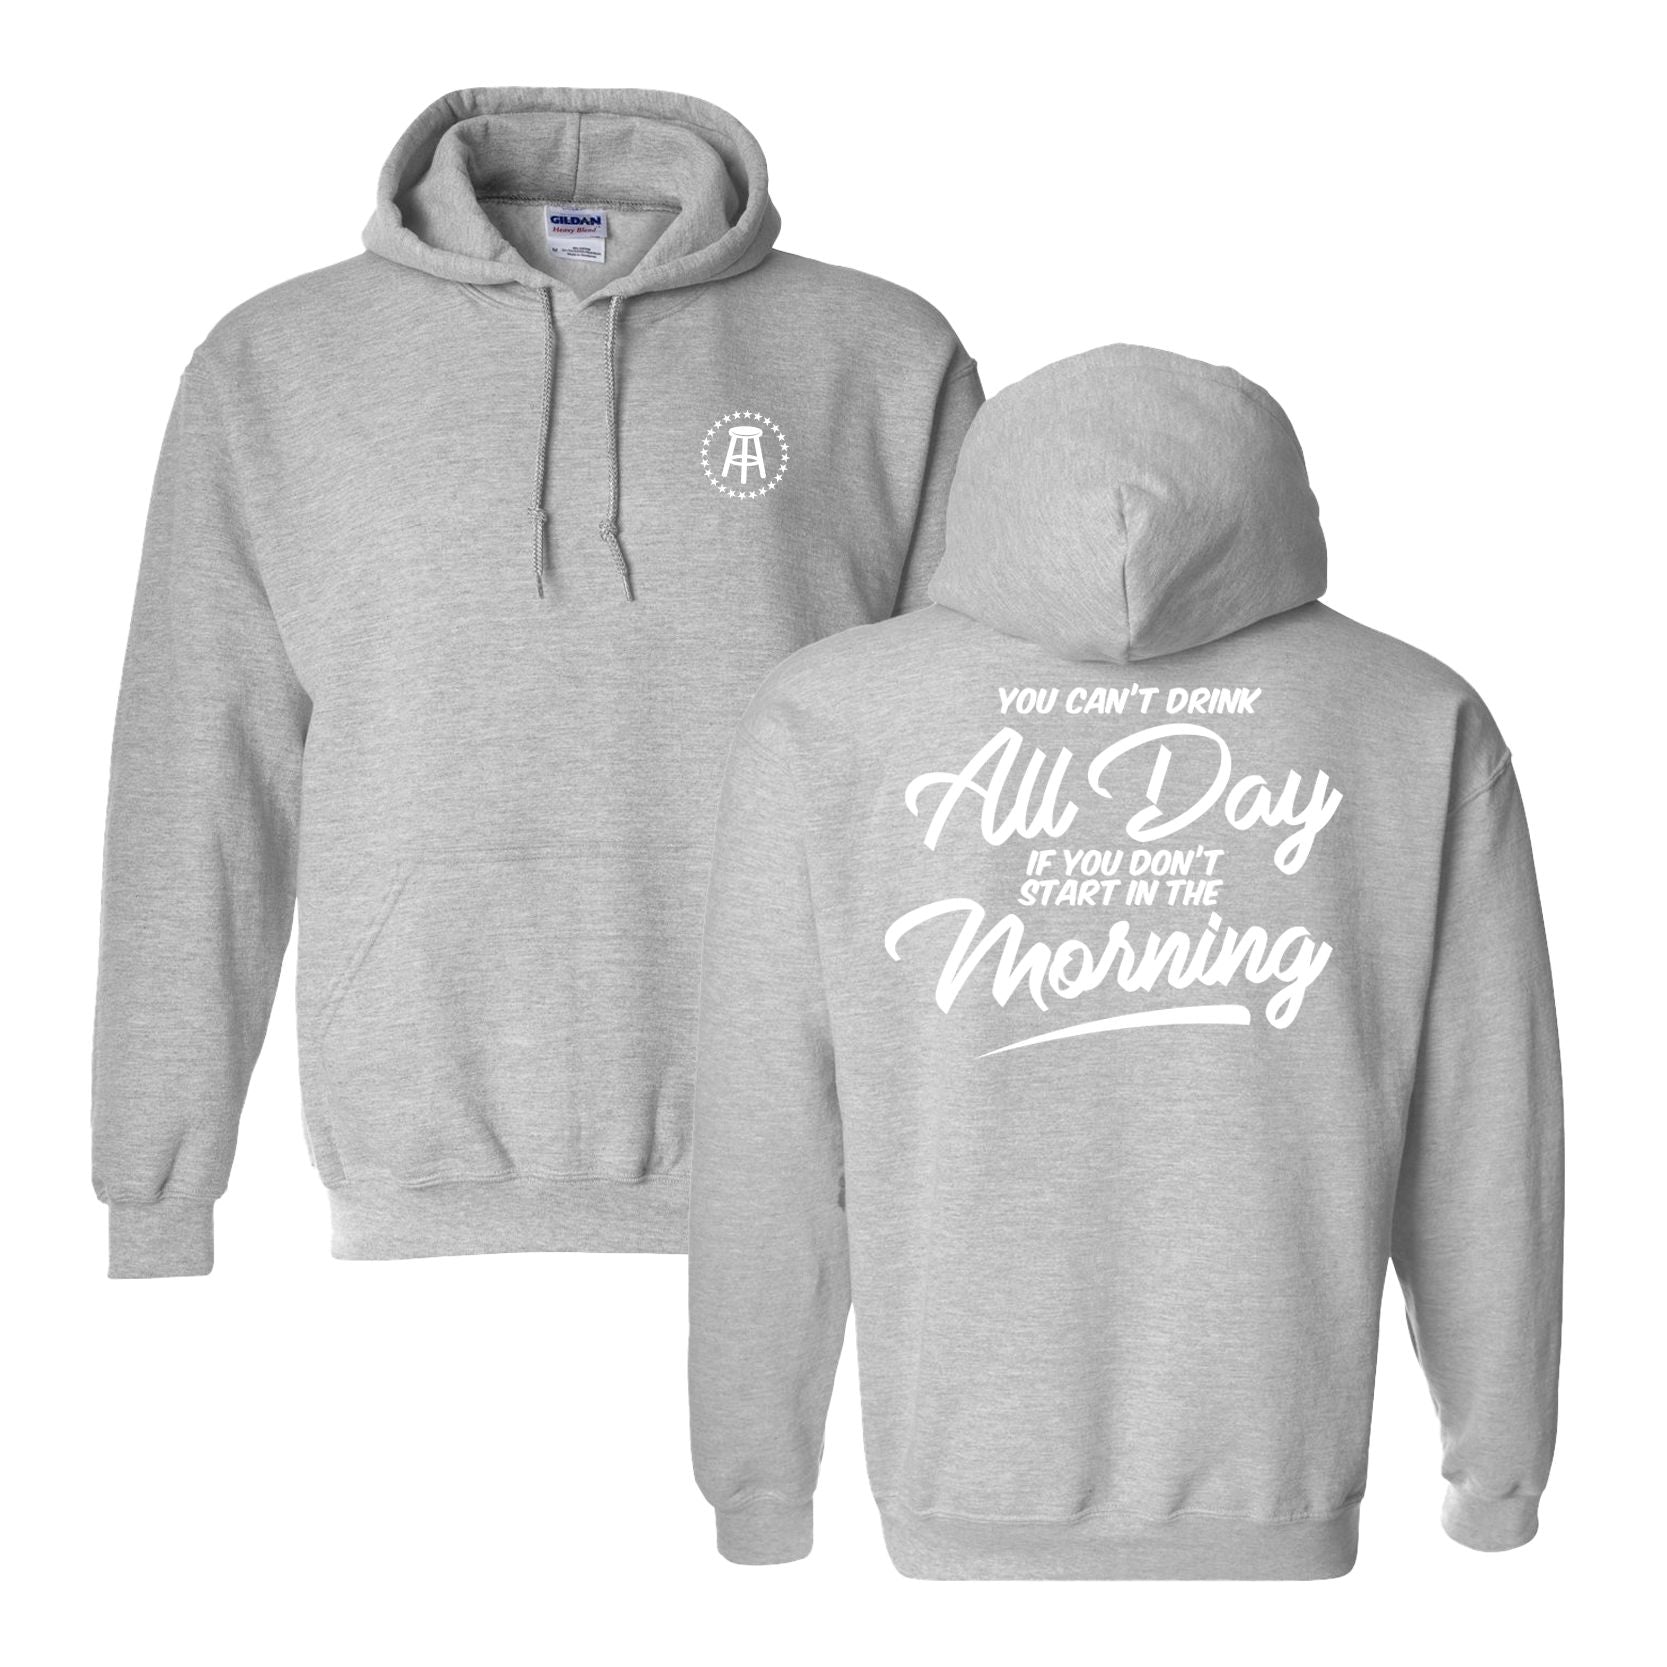 Can't Drink All Day Hoodie II